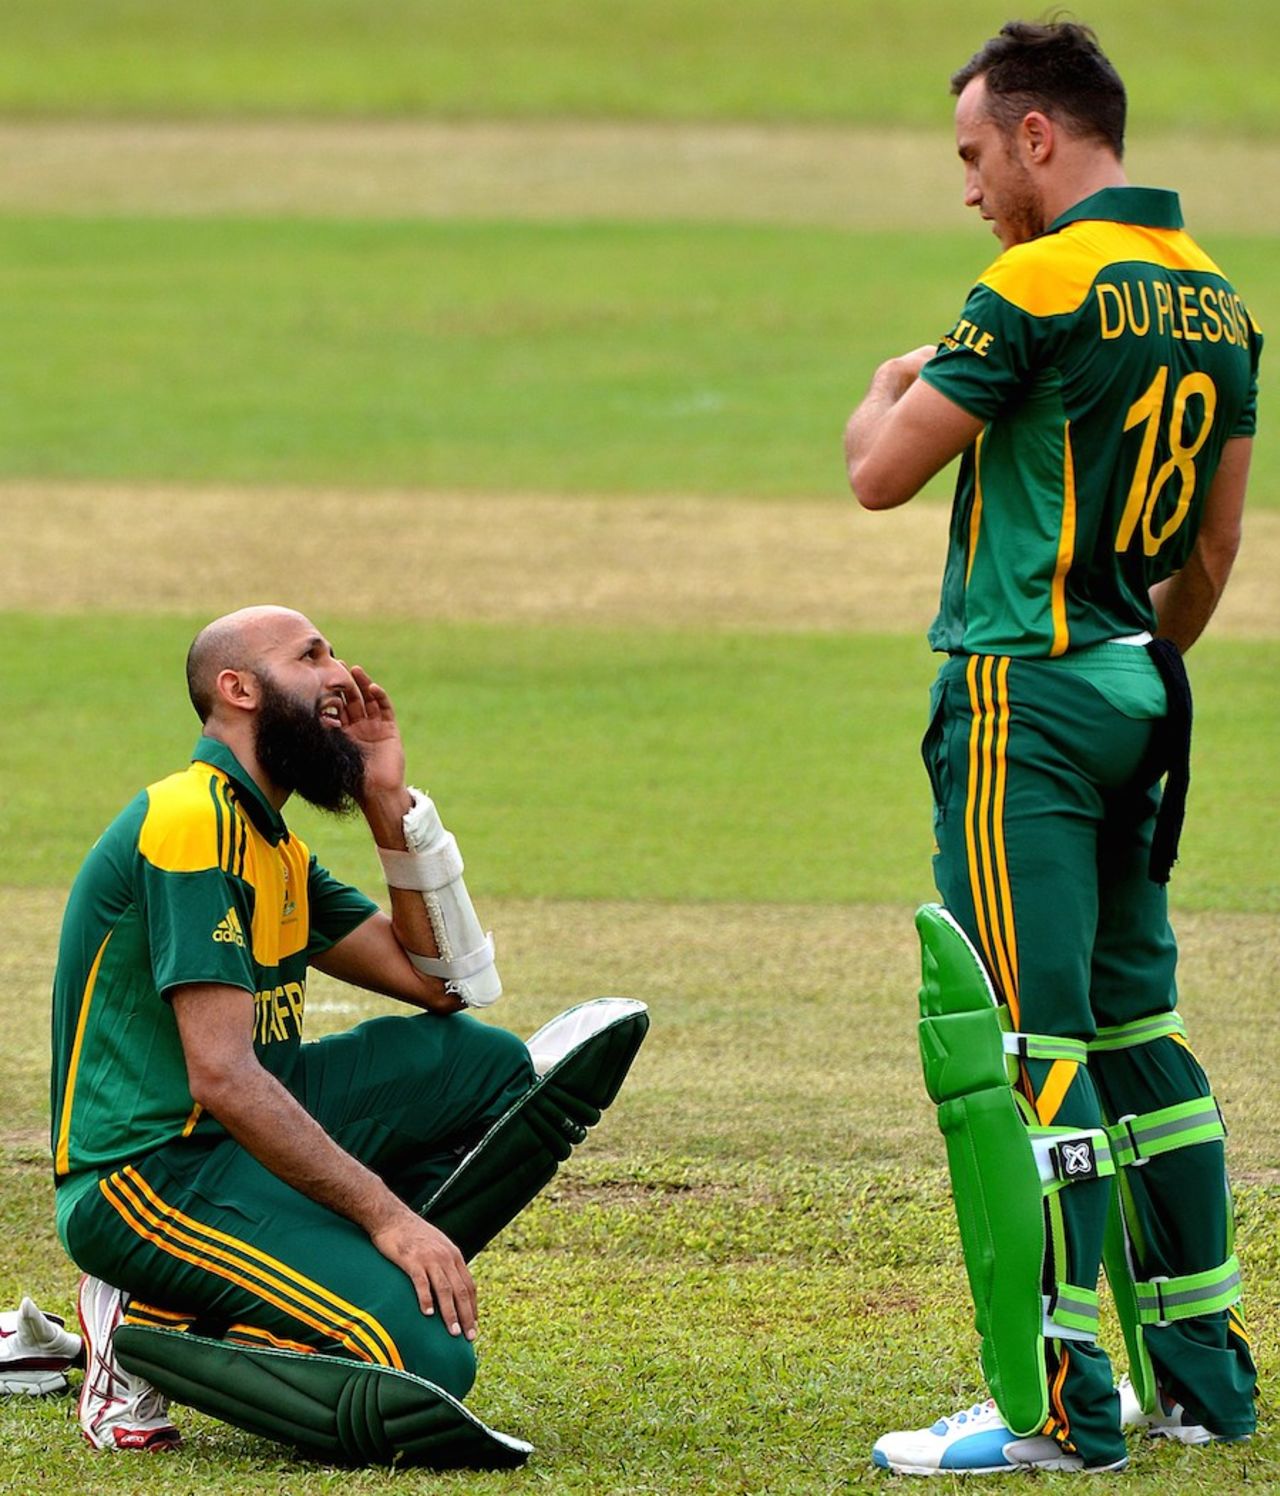 Hashim Amla and Faf du Plessis in discussion during a break, Sri Lanka Board President's XI v South Africans, Tour match, Moratuwa, July 3, 2014